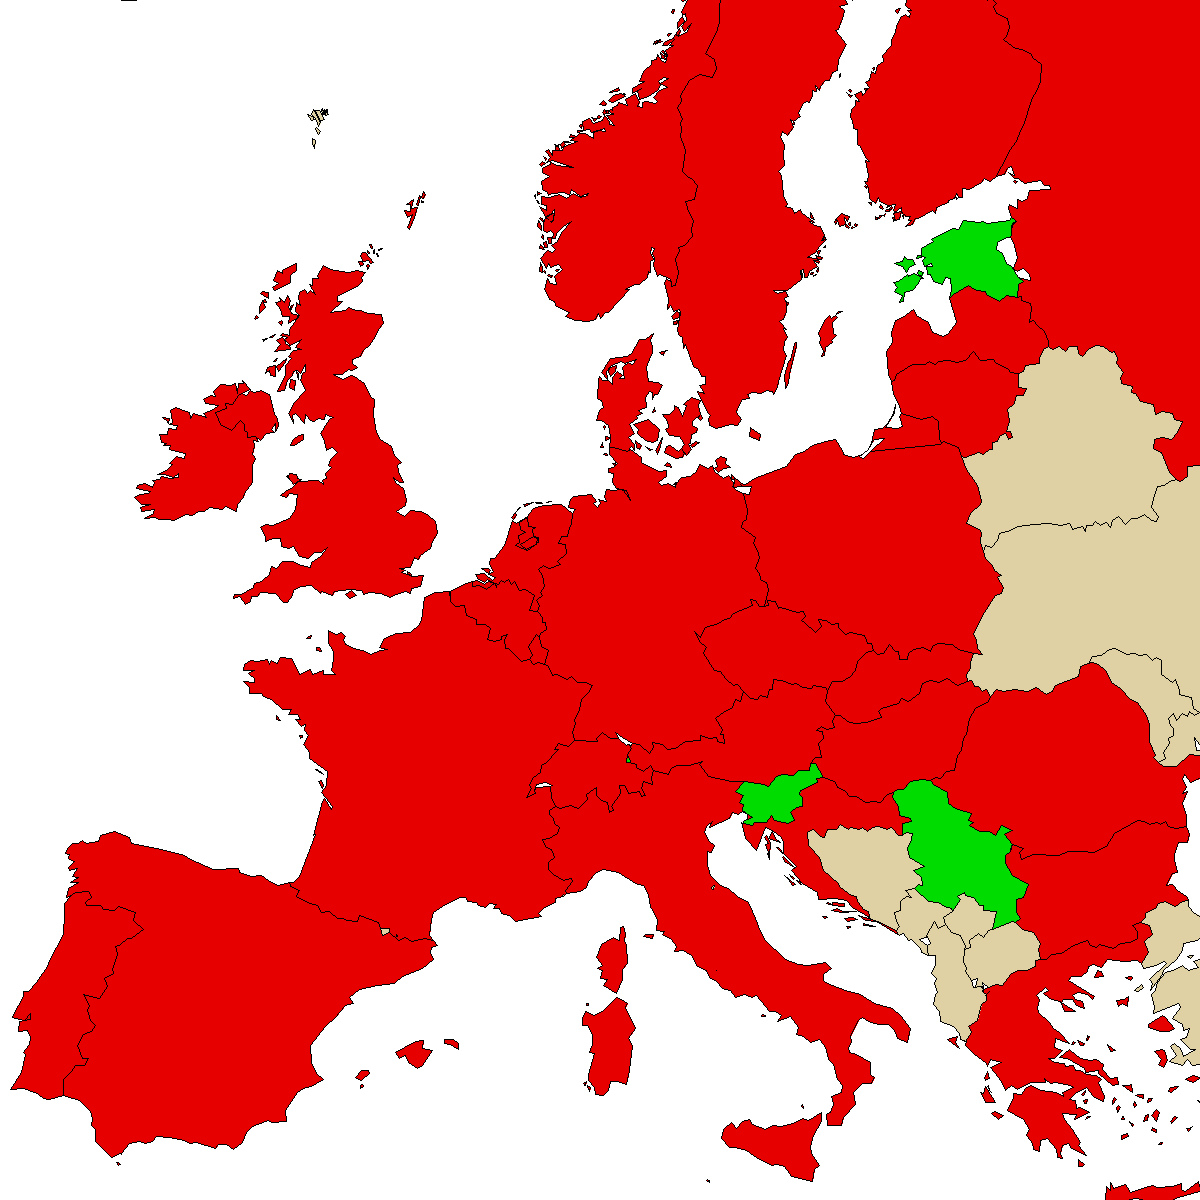 legal info map for our product 4CMC, green are countries where we found no ban, red with ban, grey is unknown